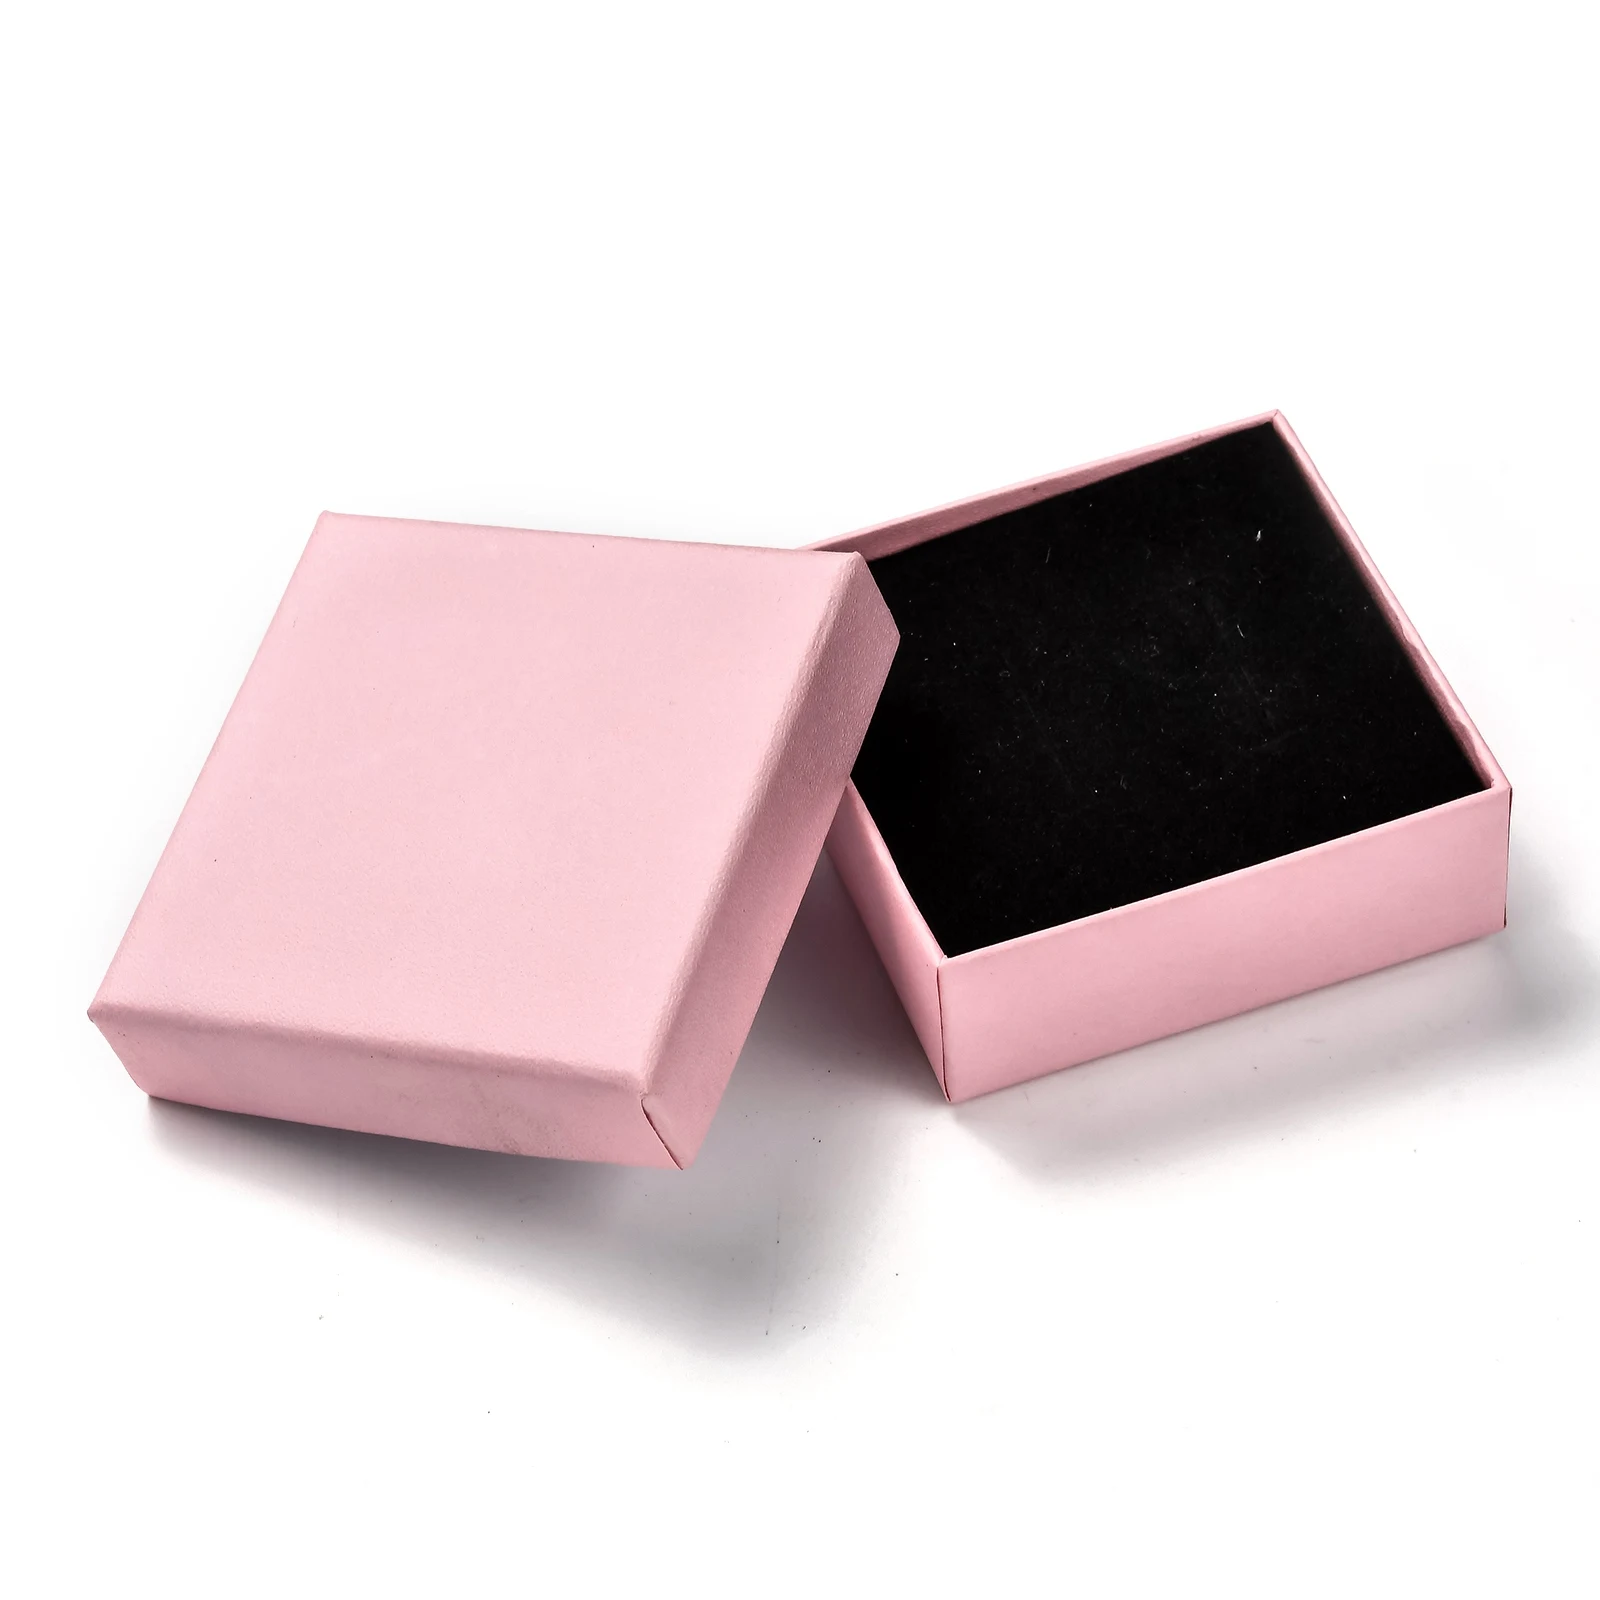 32Pcs Jewelry Display Box Cardboard Ring Boxes with Sponge for Small Watches Necklaces Earrings Bracelet Jewelry Gift Packaging